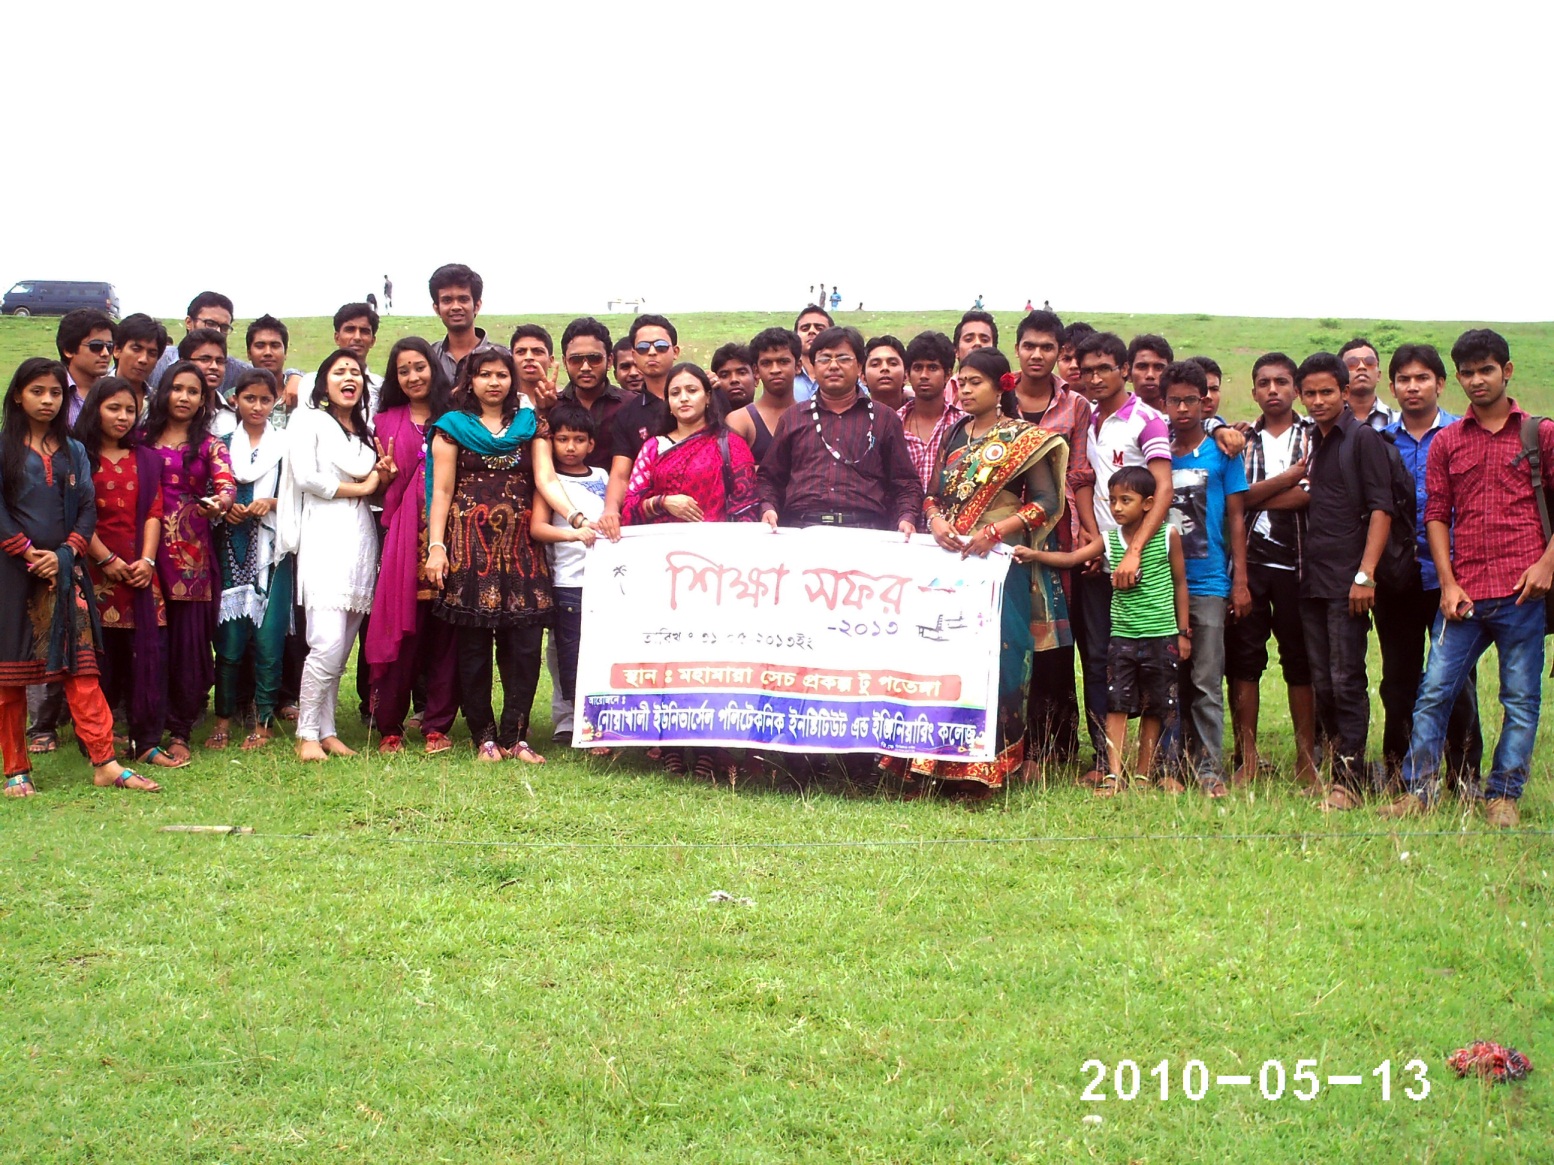 In the picture- Education Tour’ 2013 in Mohamaya with students in 28 Mahamaya Chairman of Begamganj-Sonaimuri Shikkha O Sastha Unnayan Foundation and Begumganj Technical and Computer Institute Principal Gias Uddin Mithu is seen with the students.